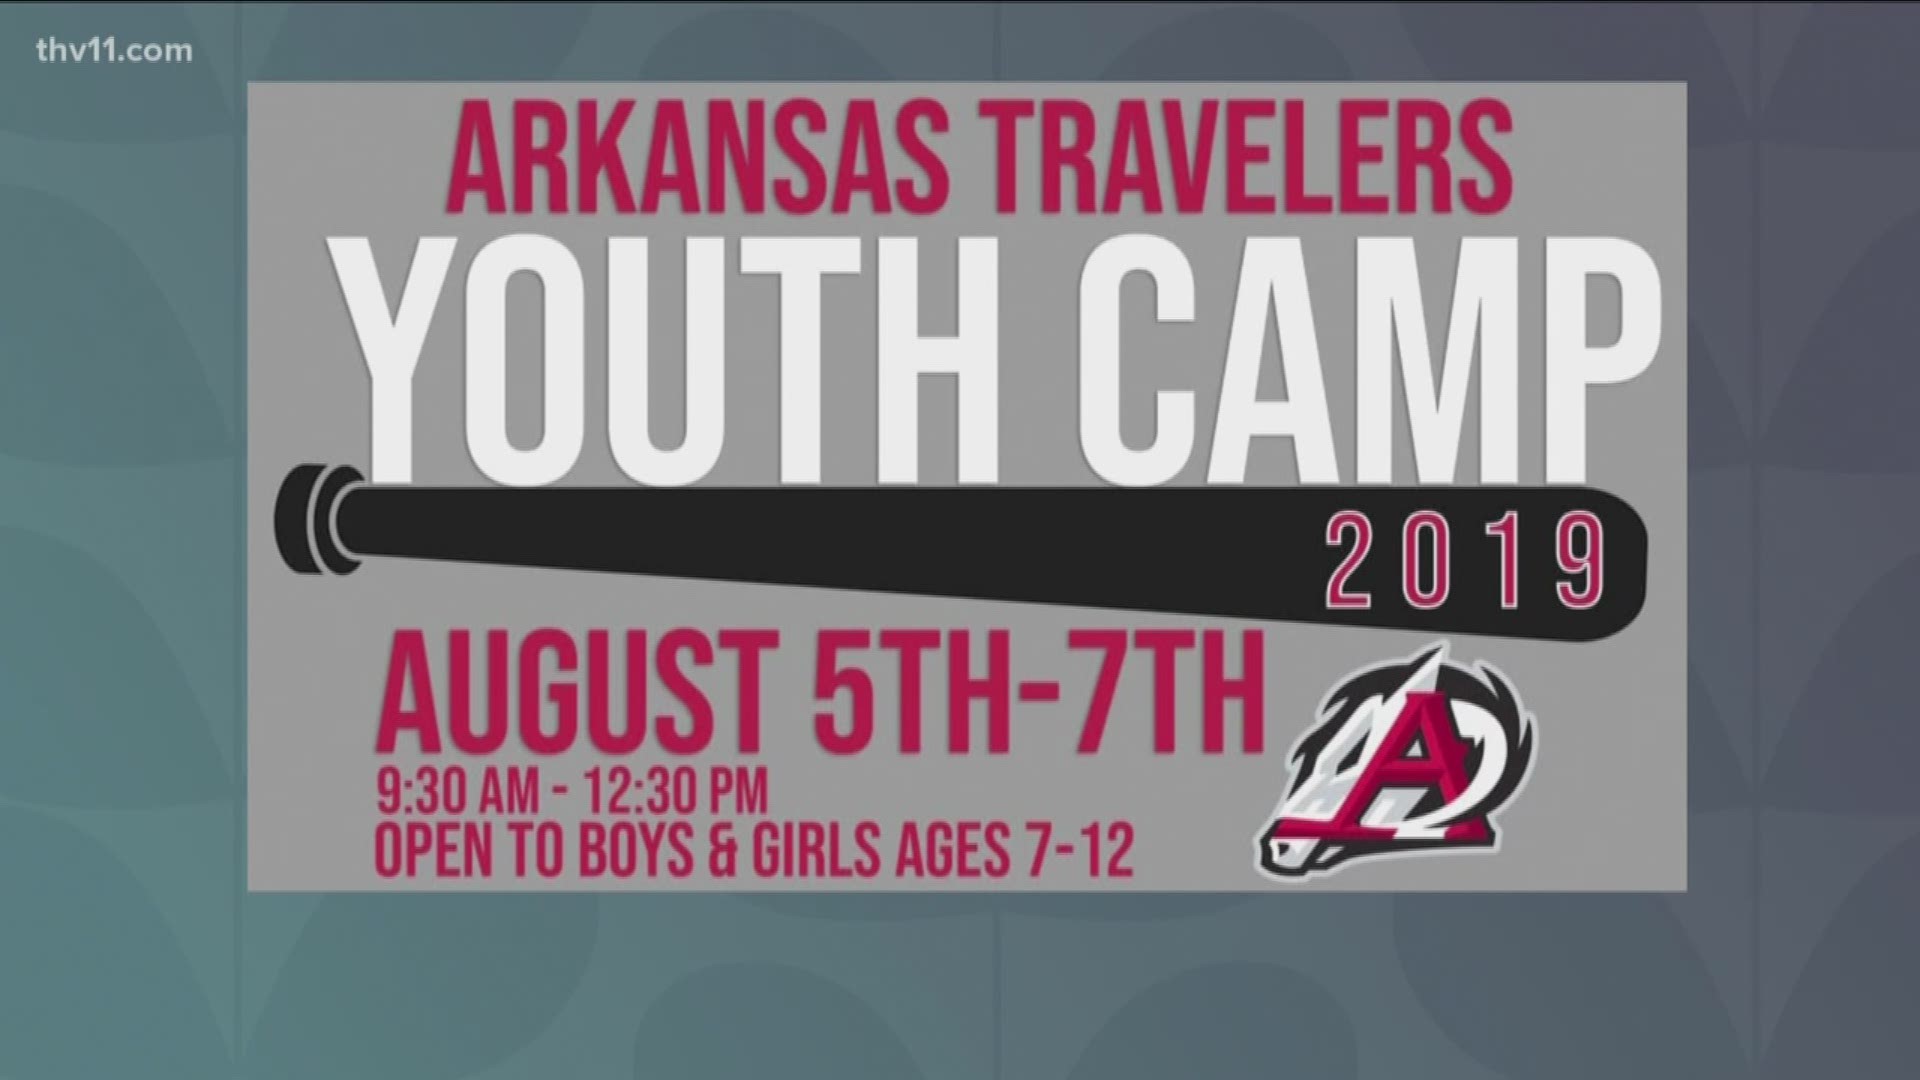 The Arkansas Travelers Youth Camp is August 5 - 7, 2019.